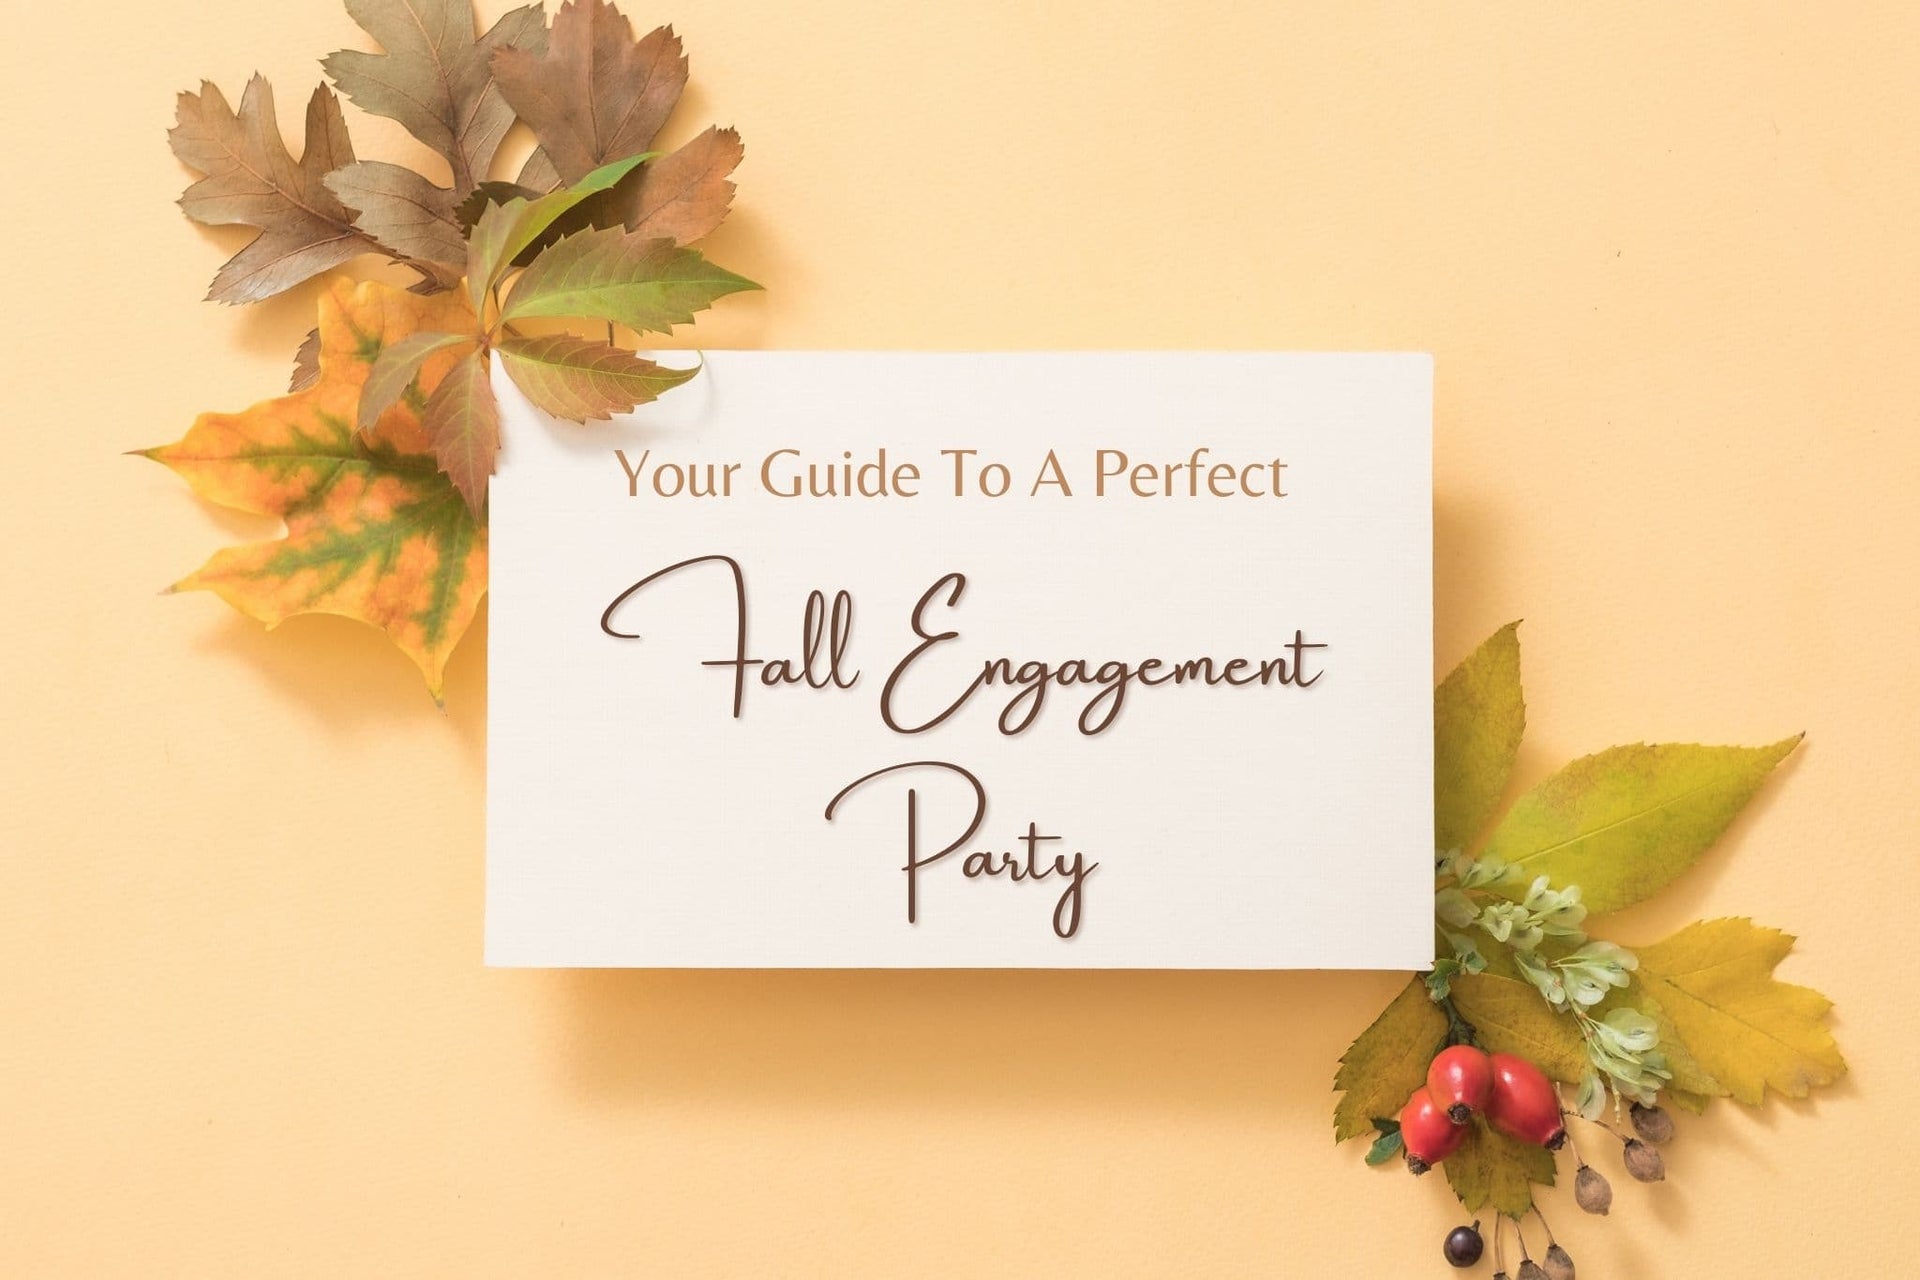 Your Guide to a Perfect Fall Engagement Party